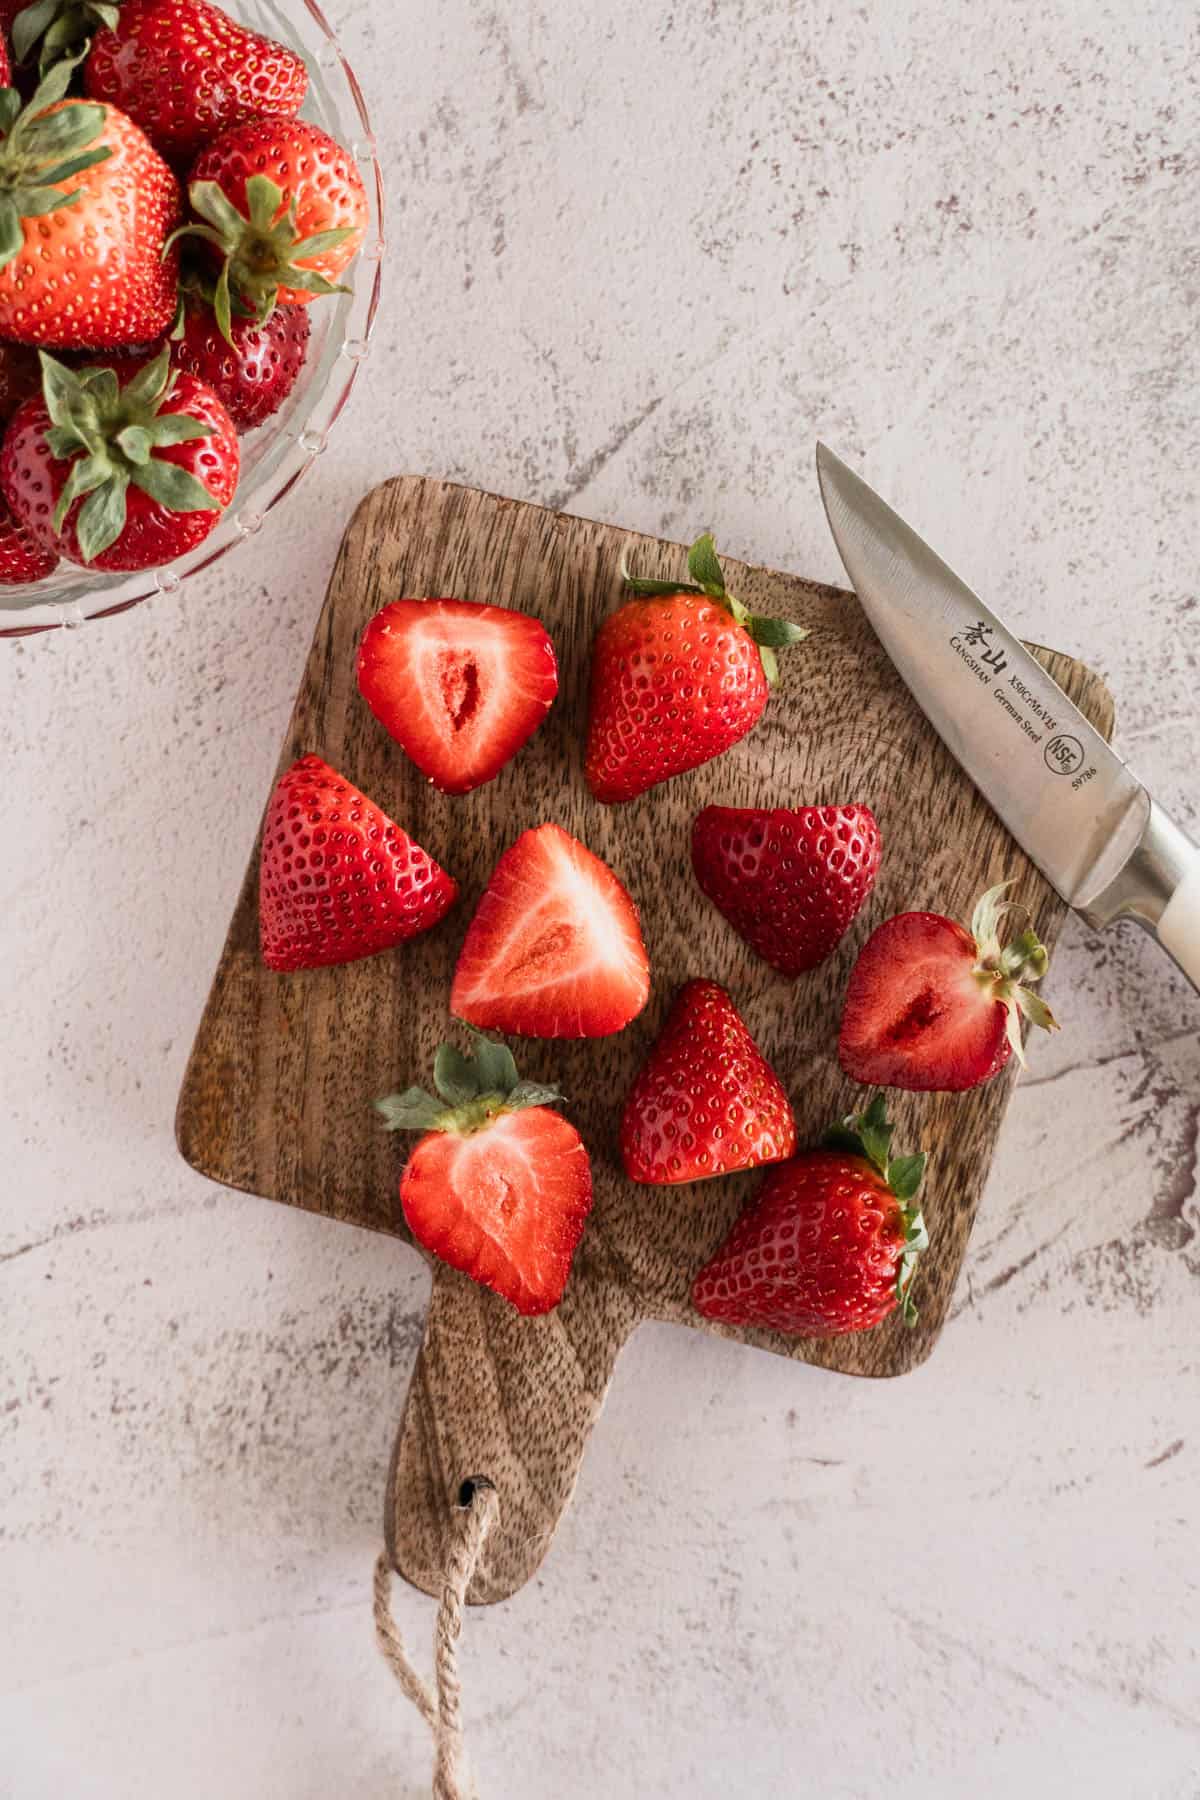 how-to-cut-strawberries-for-charcuterie.